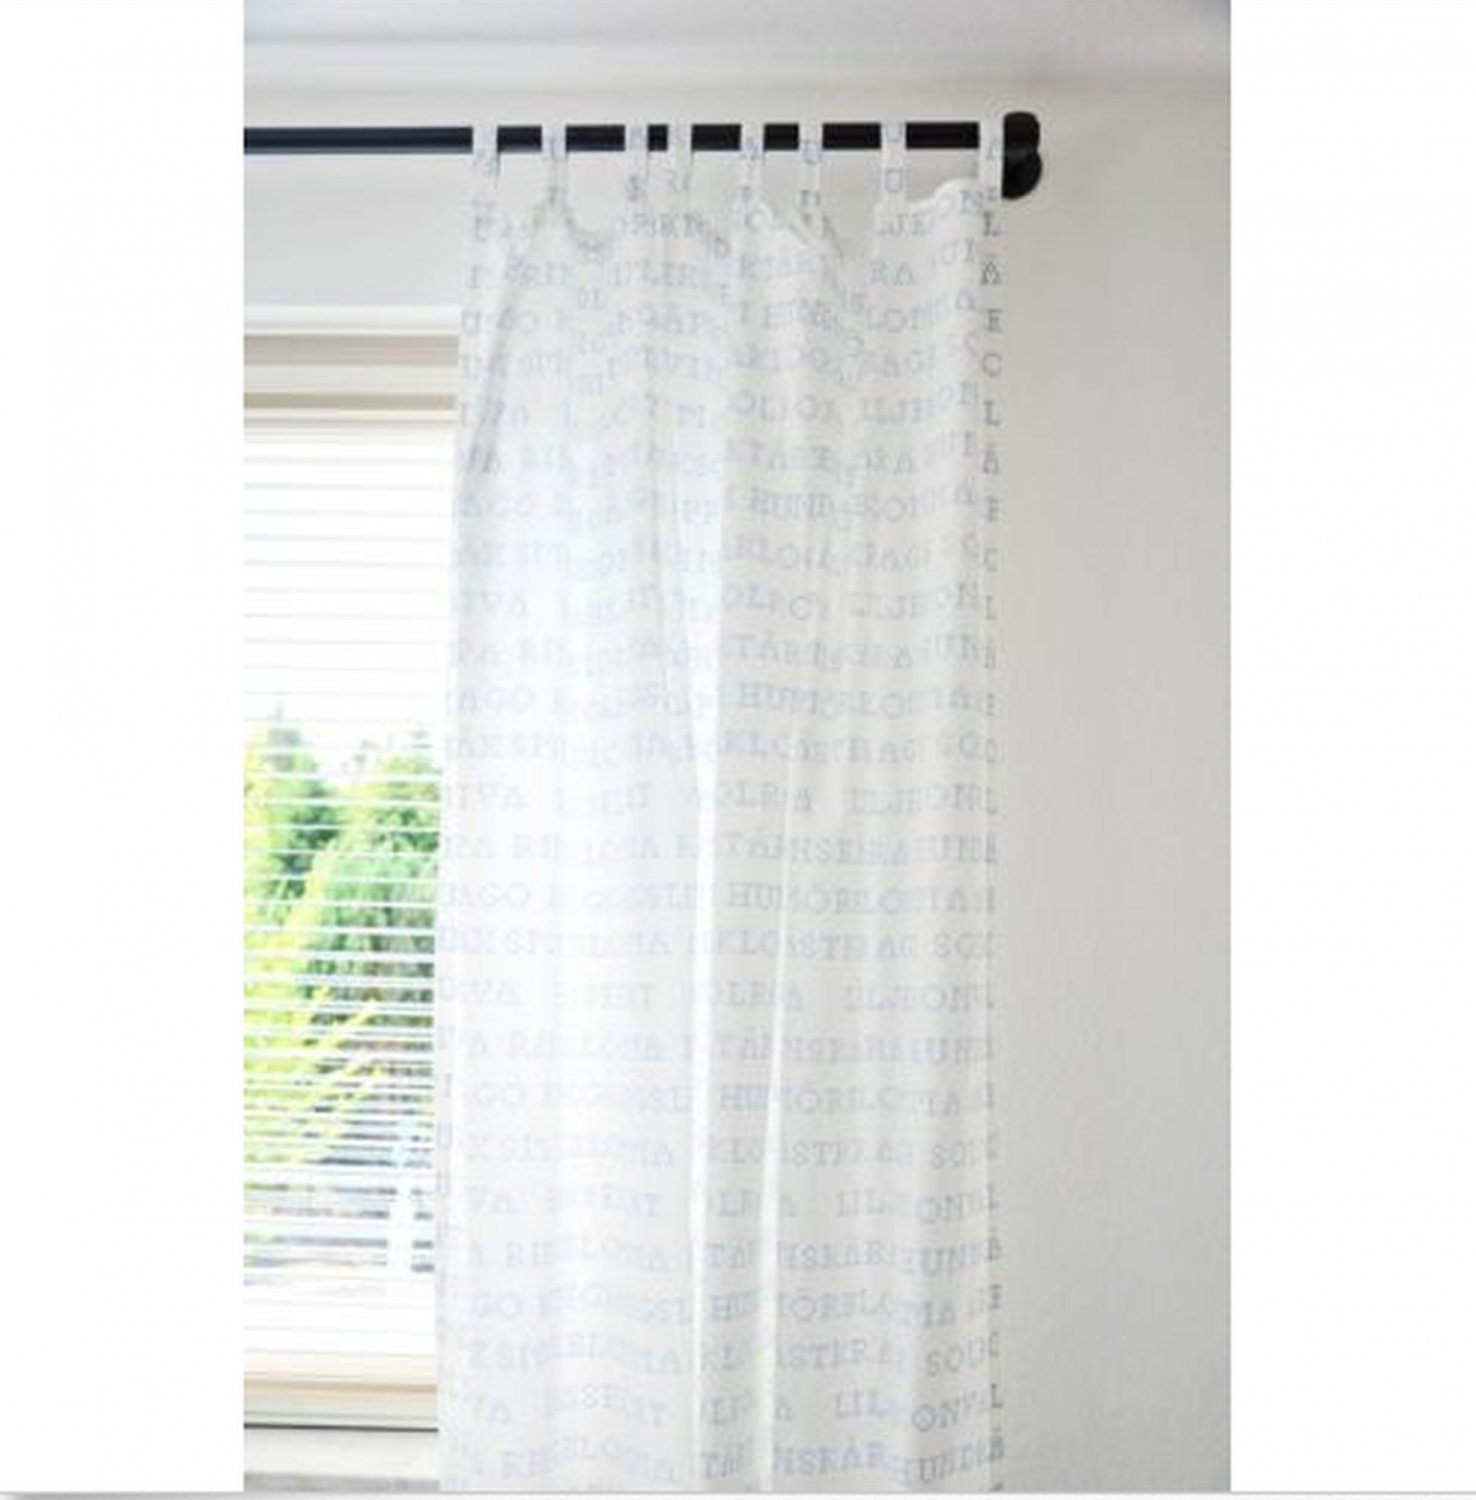 IKEA Unni Ord CURTAINS Drapes White Blue Cross-Stitch Design Lettering Tab Top